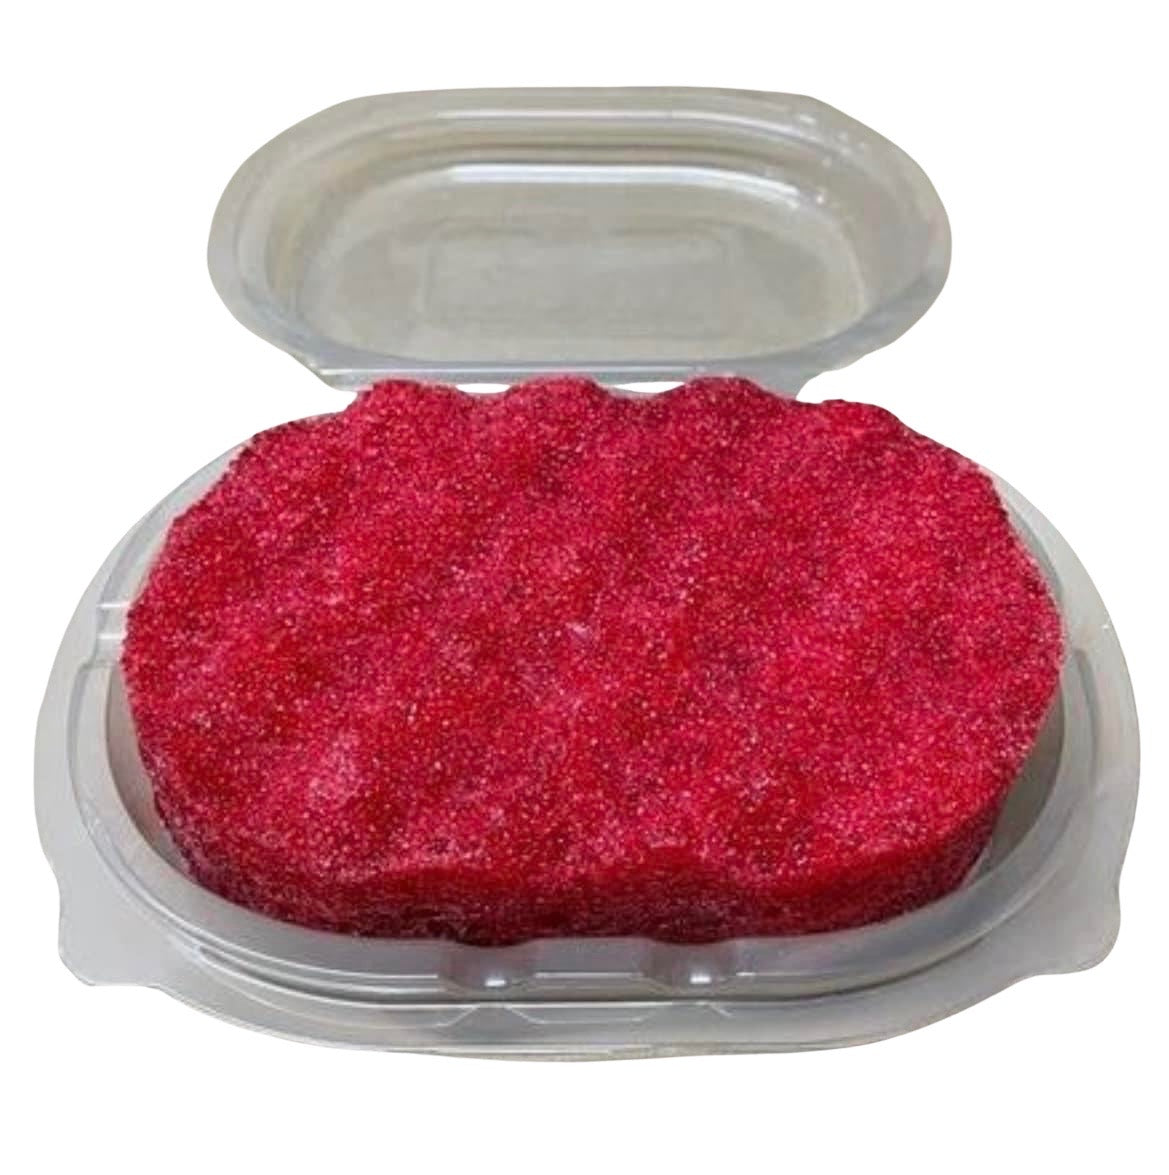 A plastic container with a red Perfume Soap Sponges by The Soap Gals, infused with designer inspired fragrances.